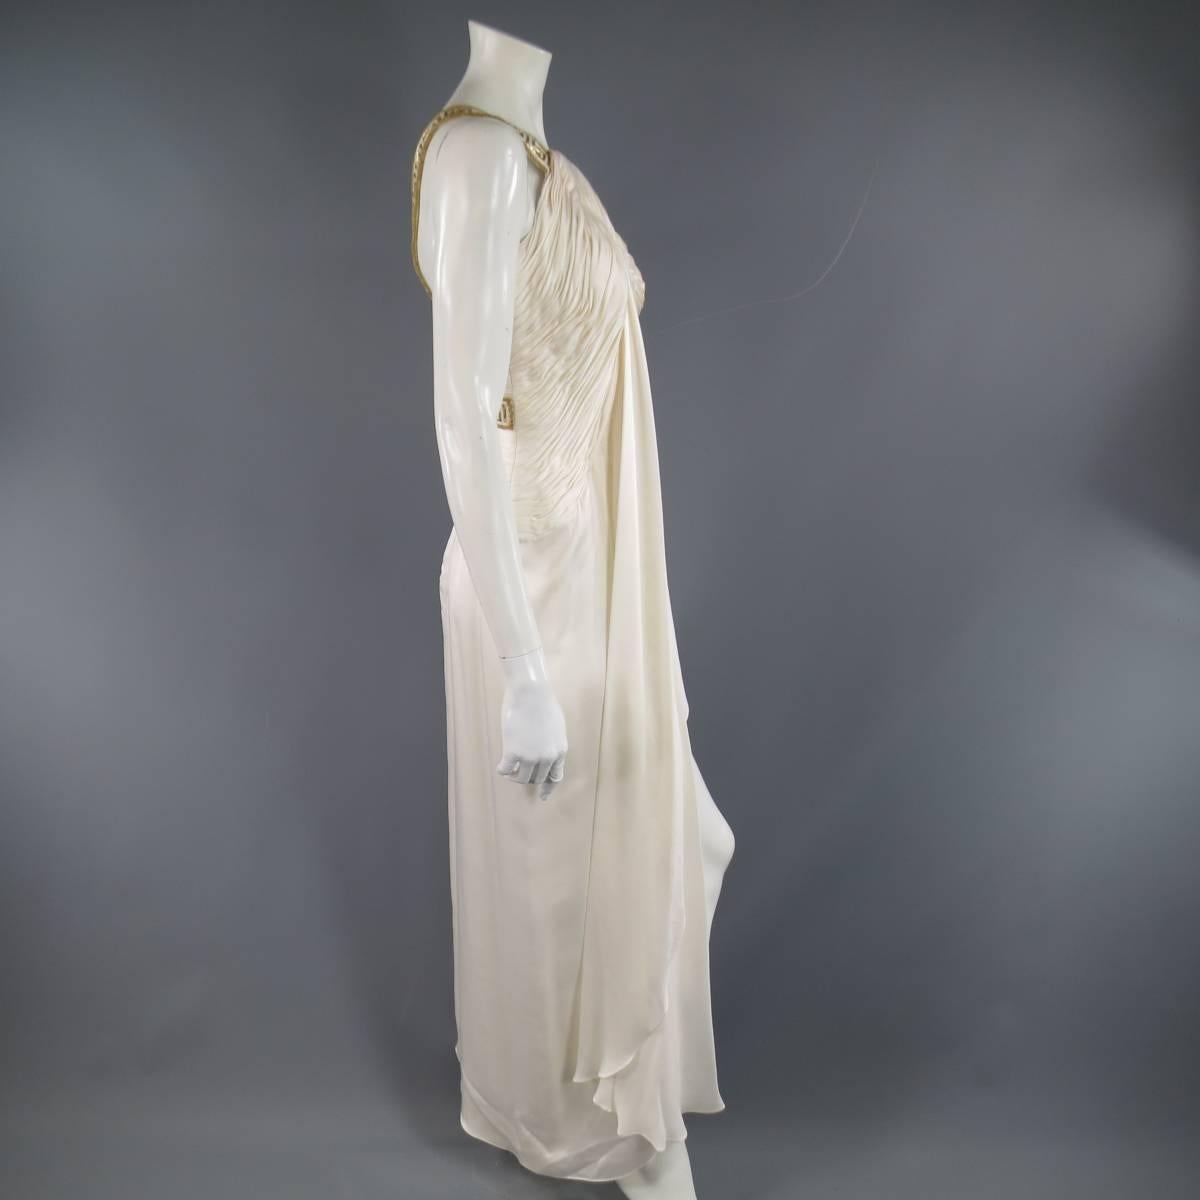 MICHAEL CASEY Cream & Gold Grecian Gown - Size 6  1